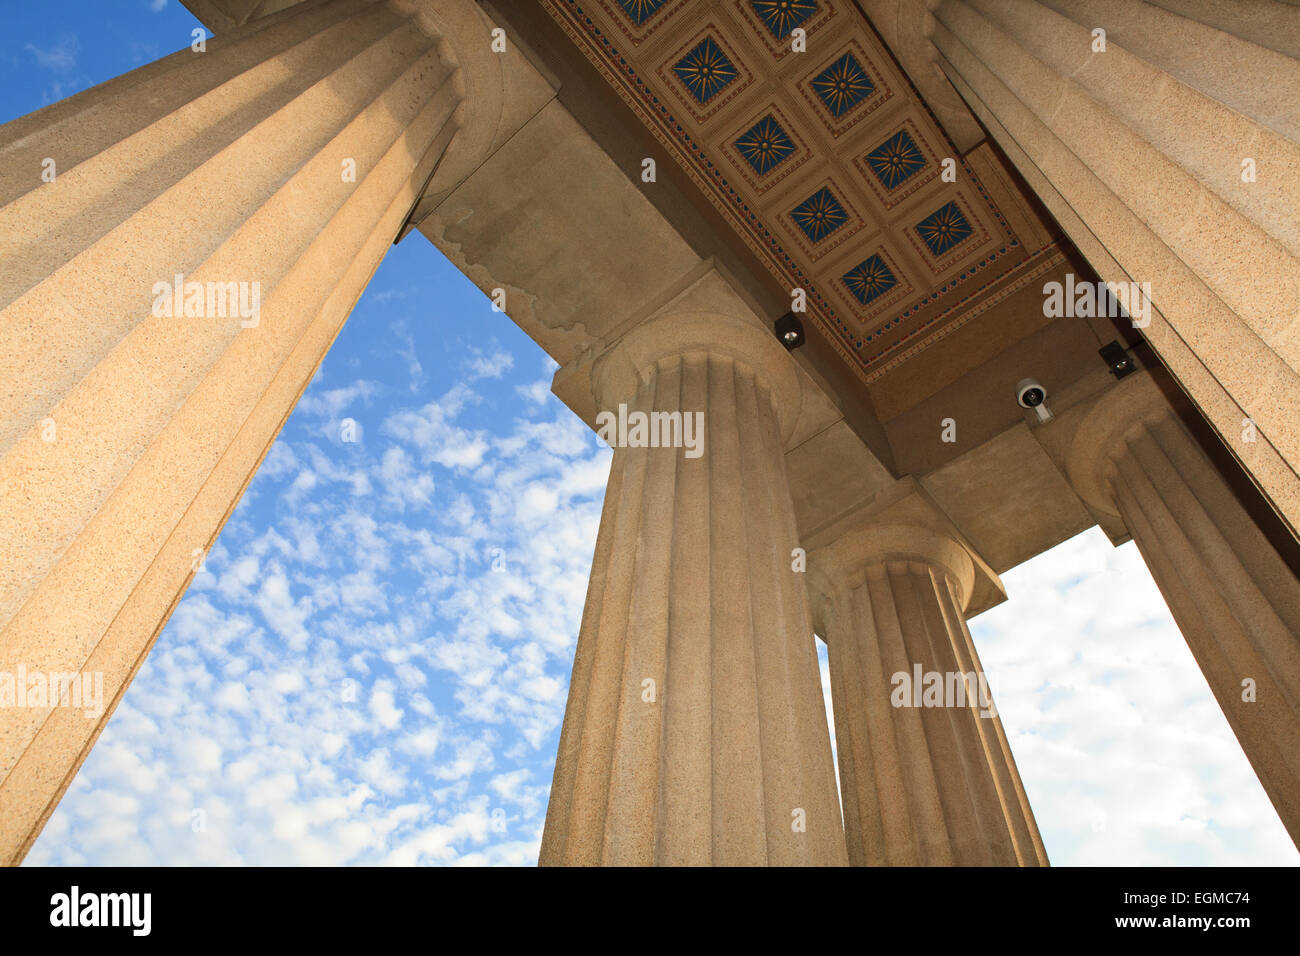 Columns and ceiling details on the Nashville, TN replica of the Greek Parthenon, at sunset. Stock Photo